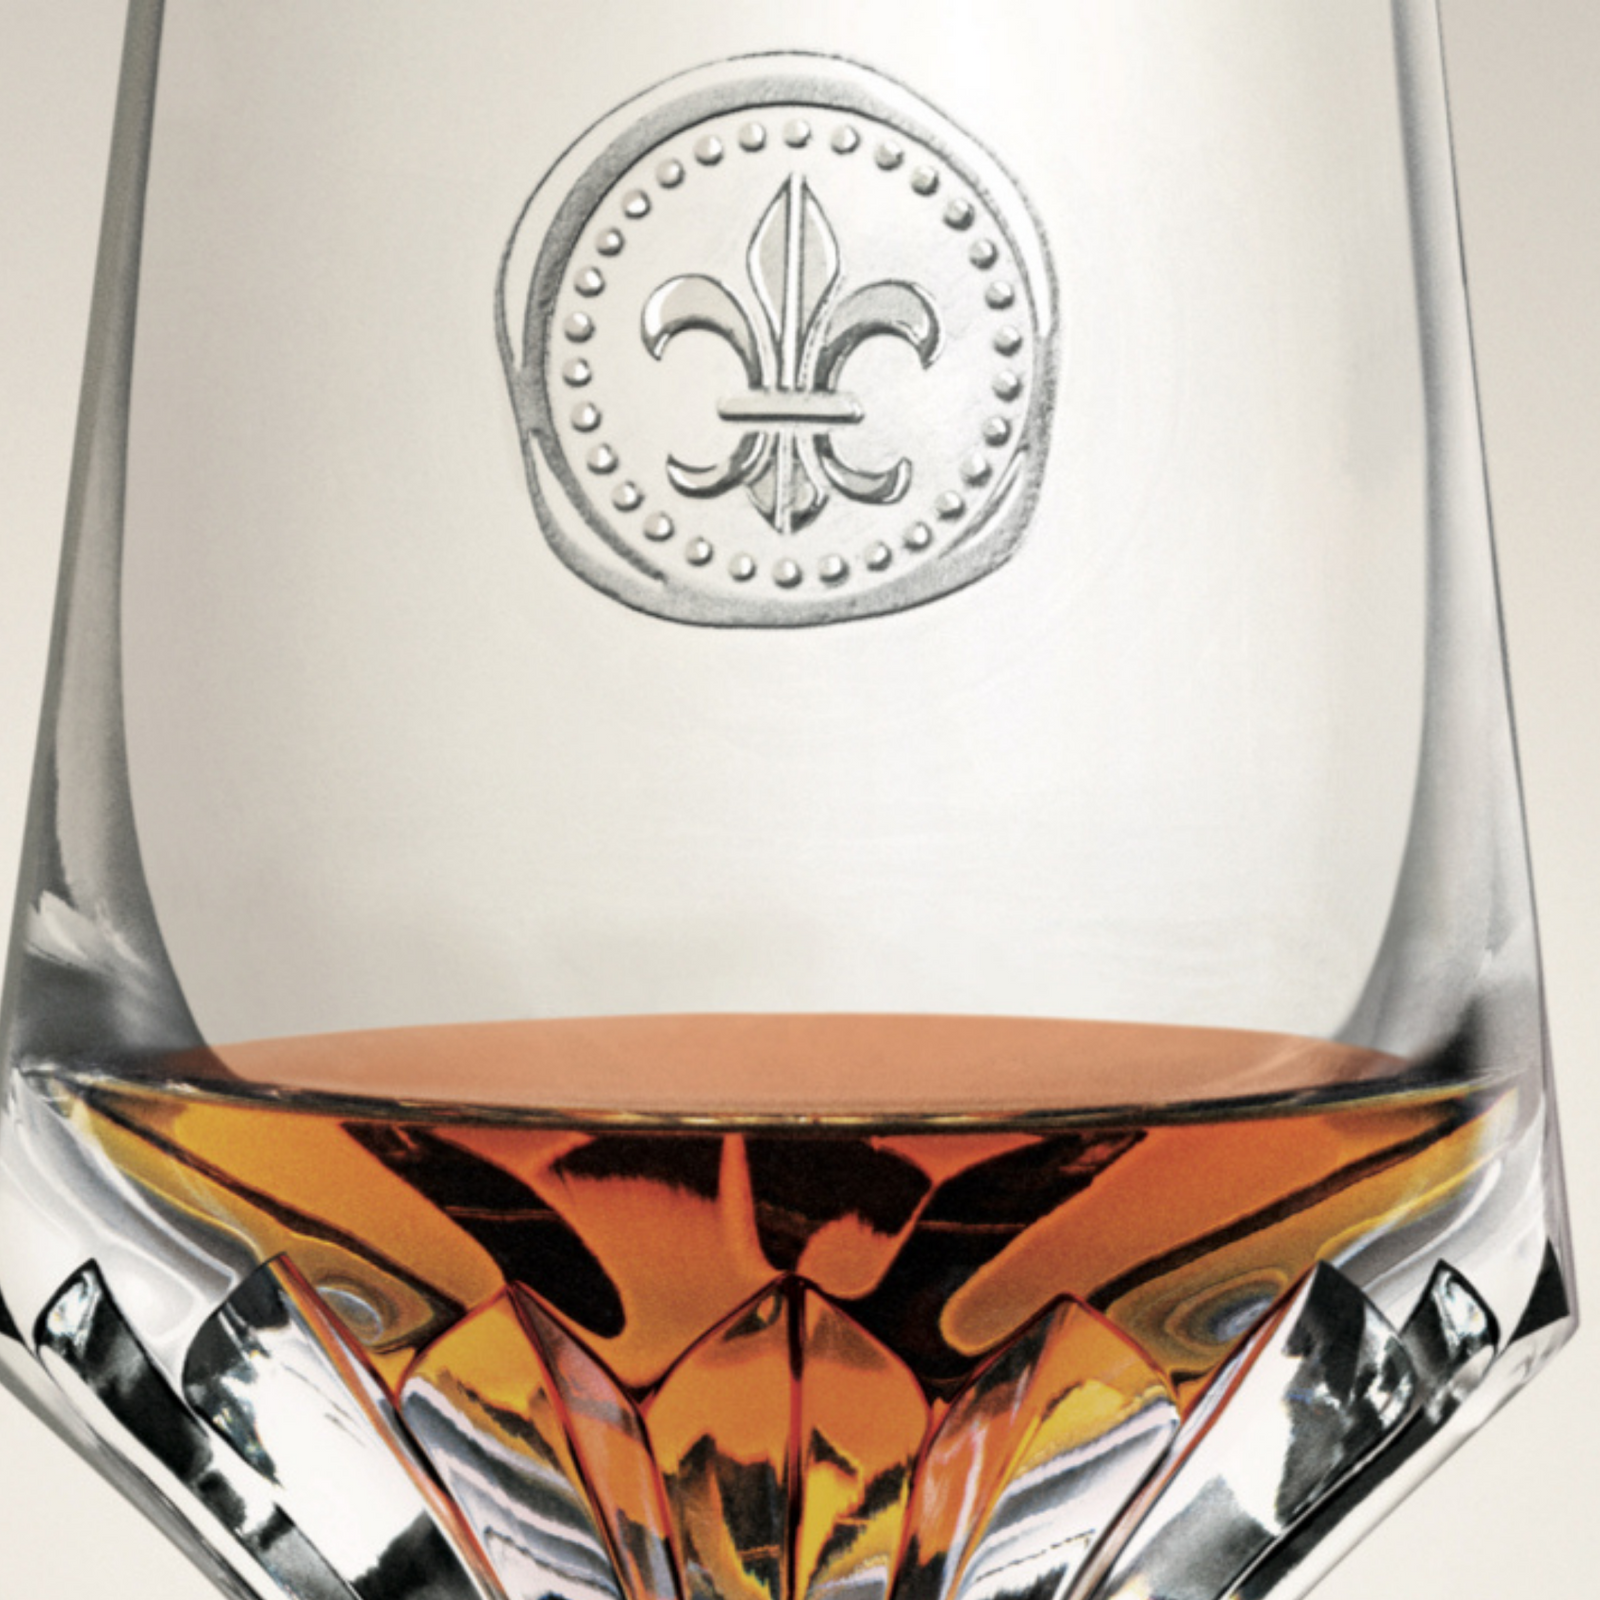 The Facets of Louis XIII - 2 Crystal Glasses, Food & Drinks